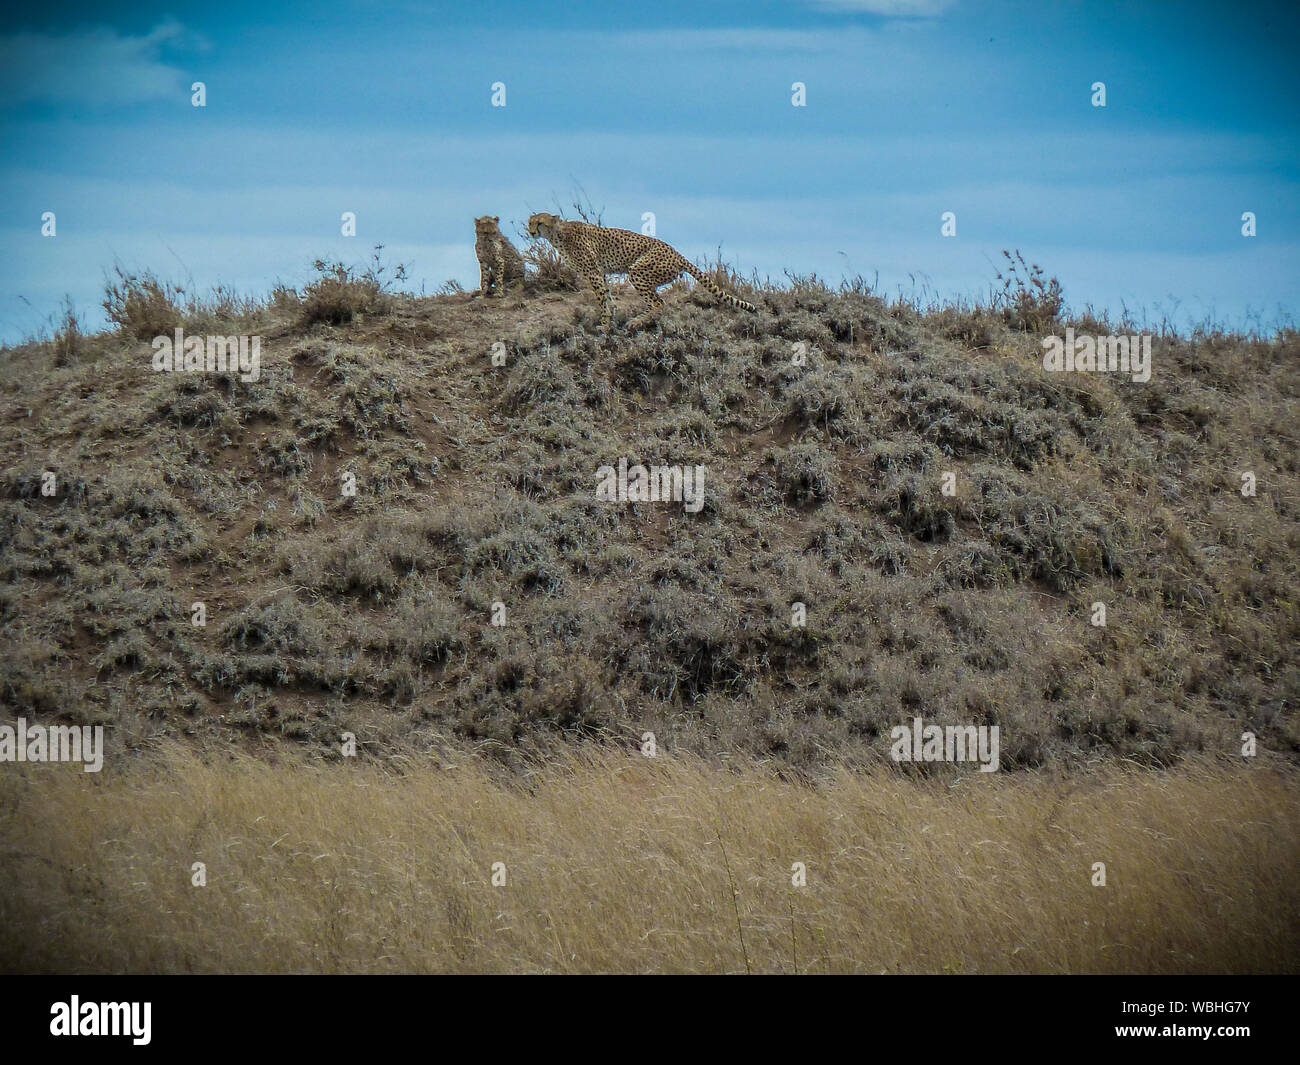 Low Angle View Of Cheetahs On Hill Against Blue Sky Stock Photo